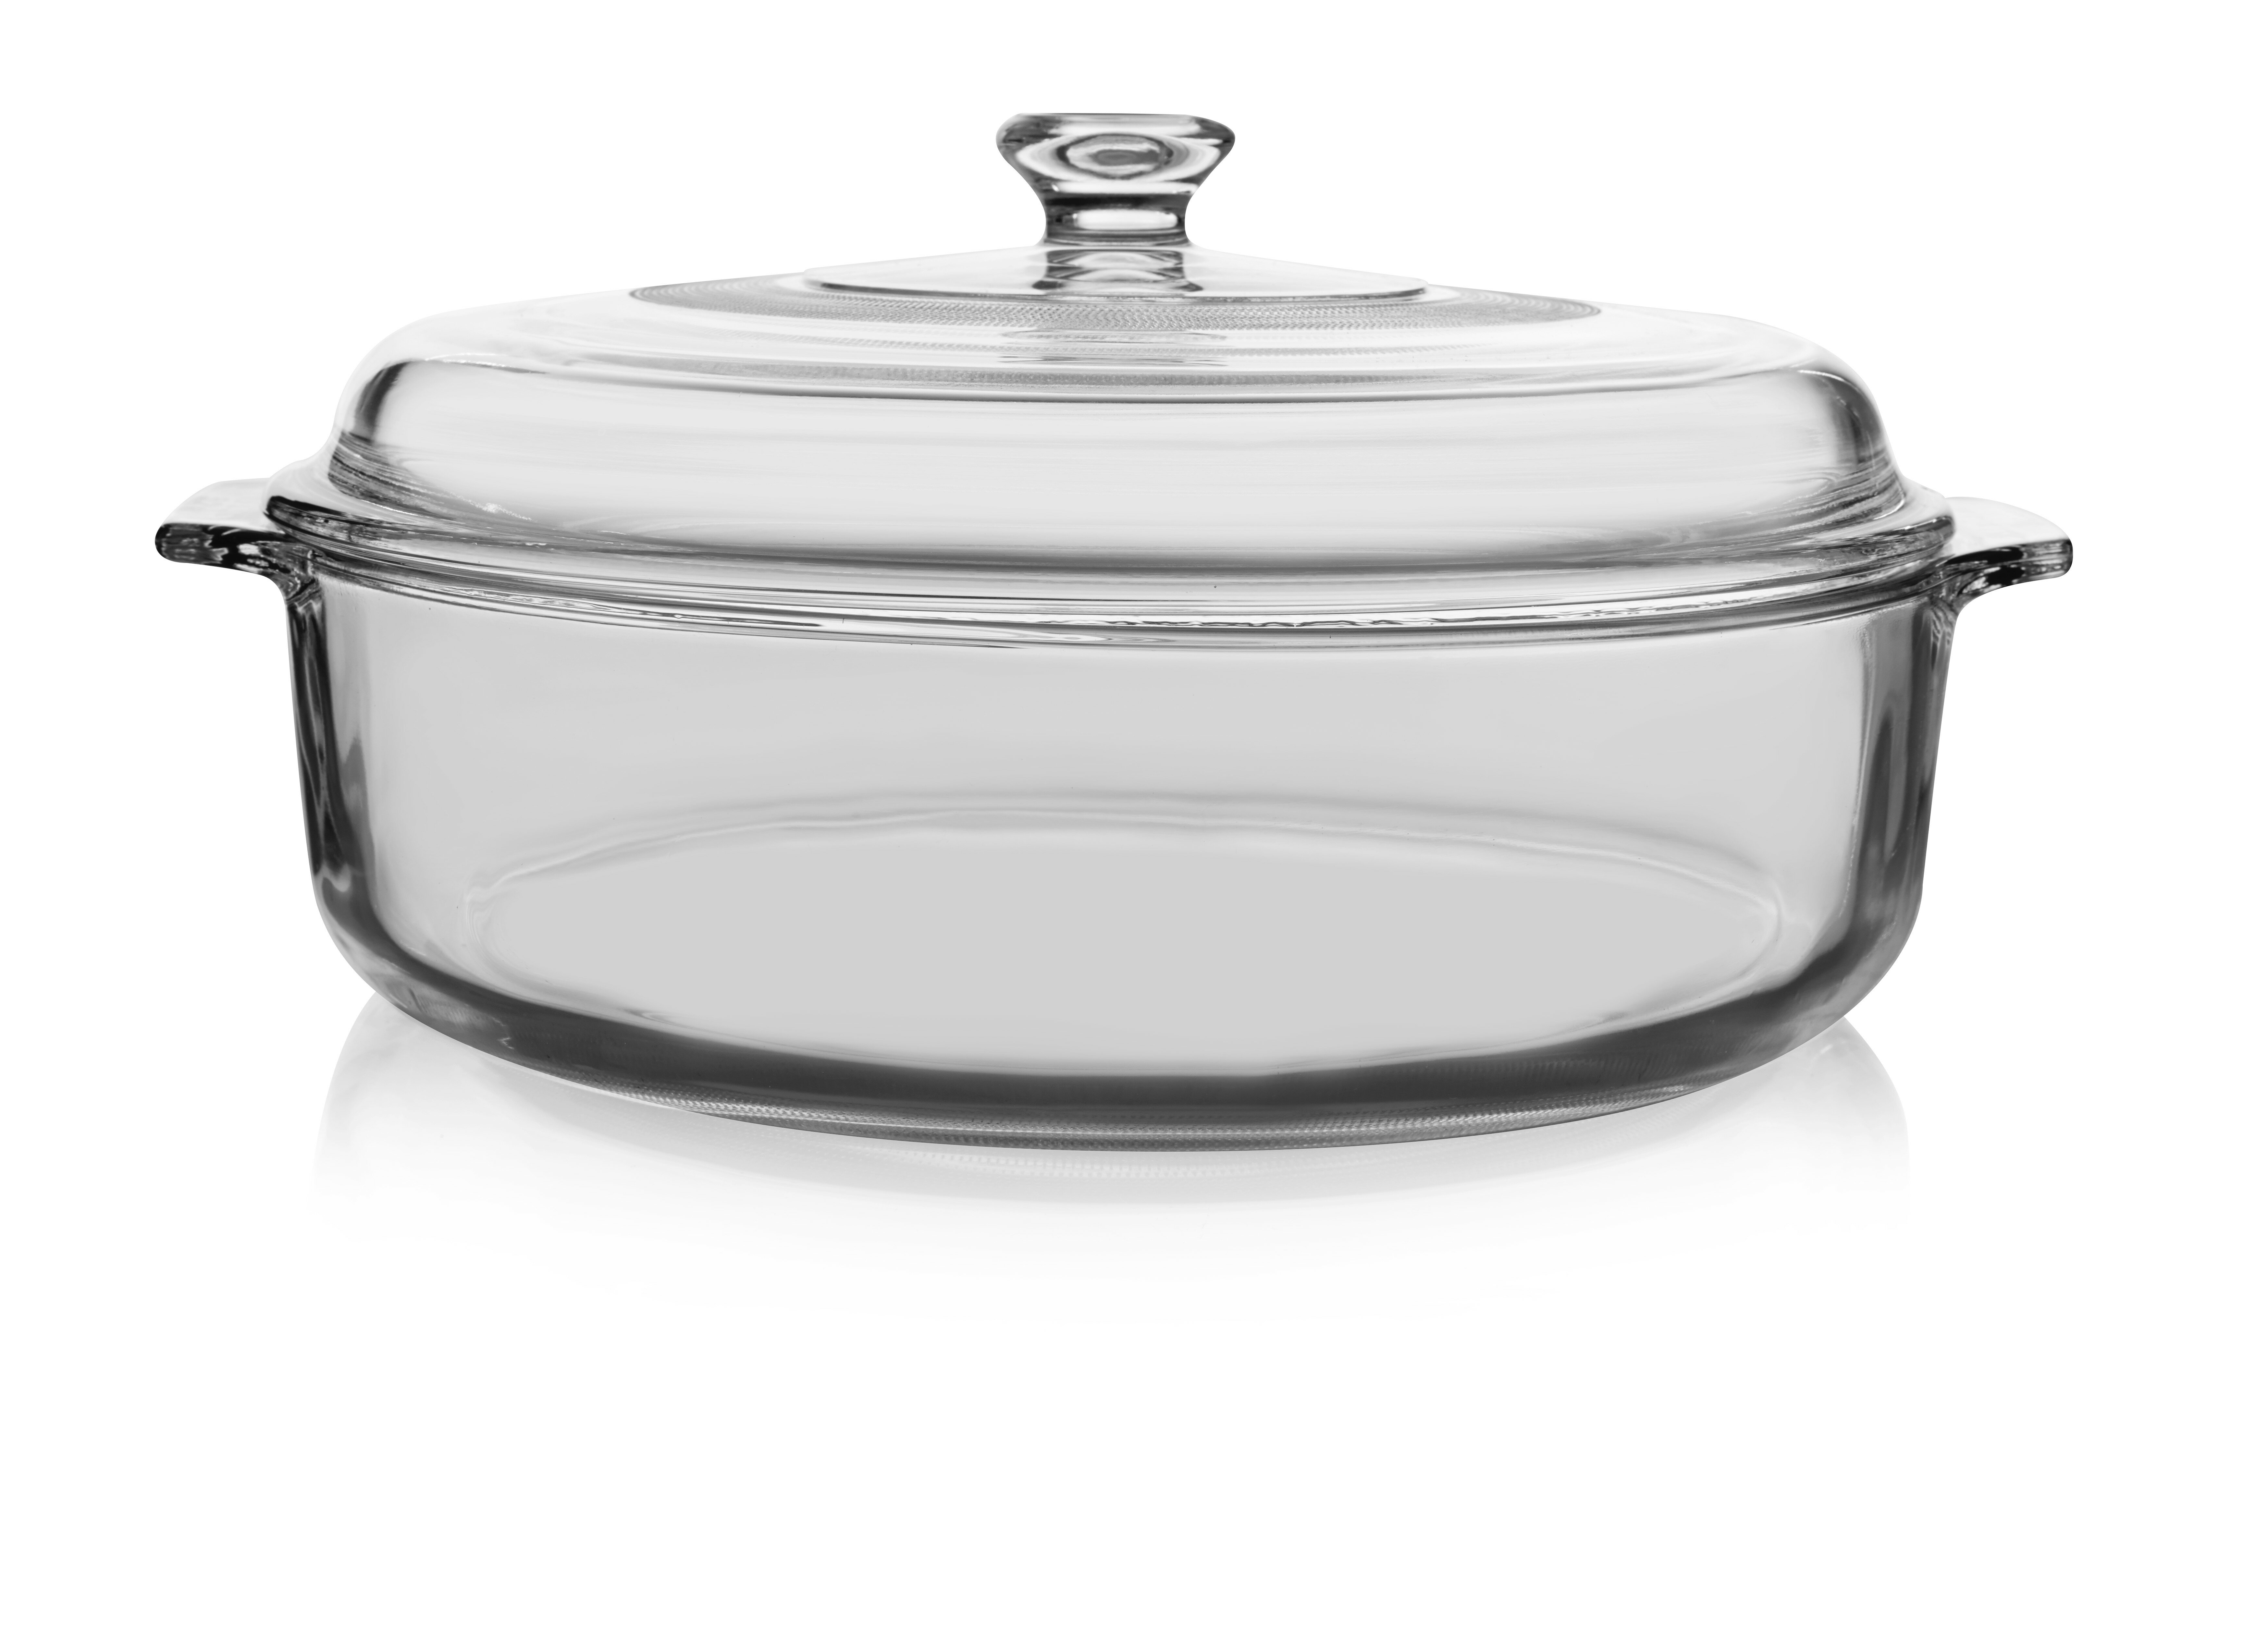 3-quart Libbey Baker's Basics Glass Casserole Dish with Cover 